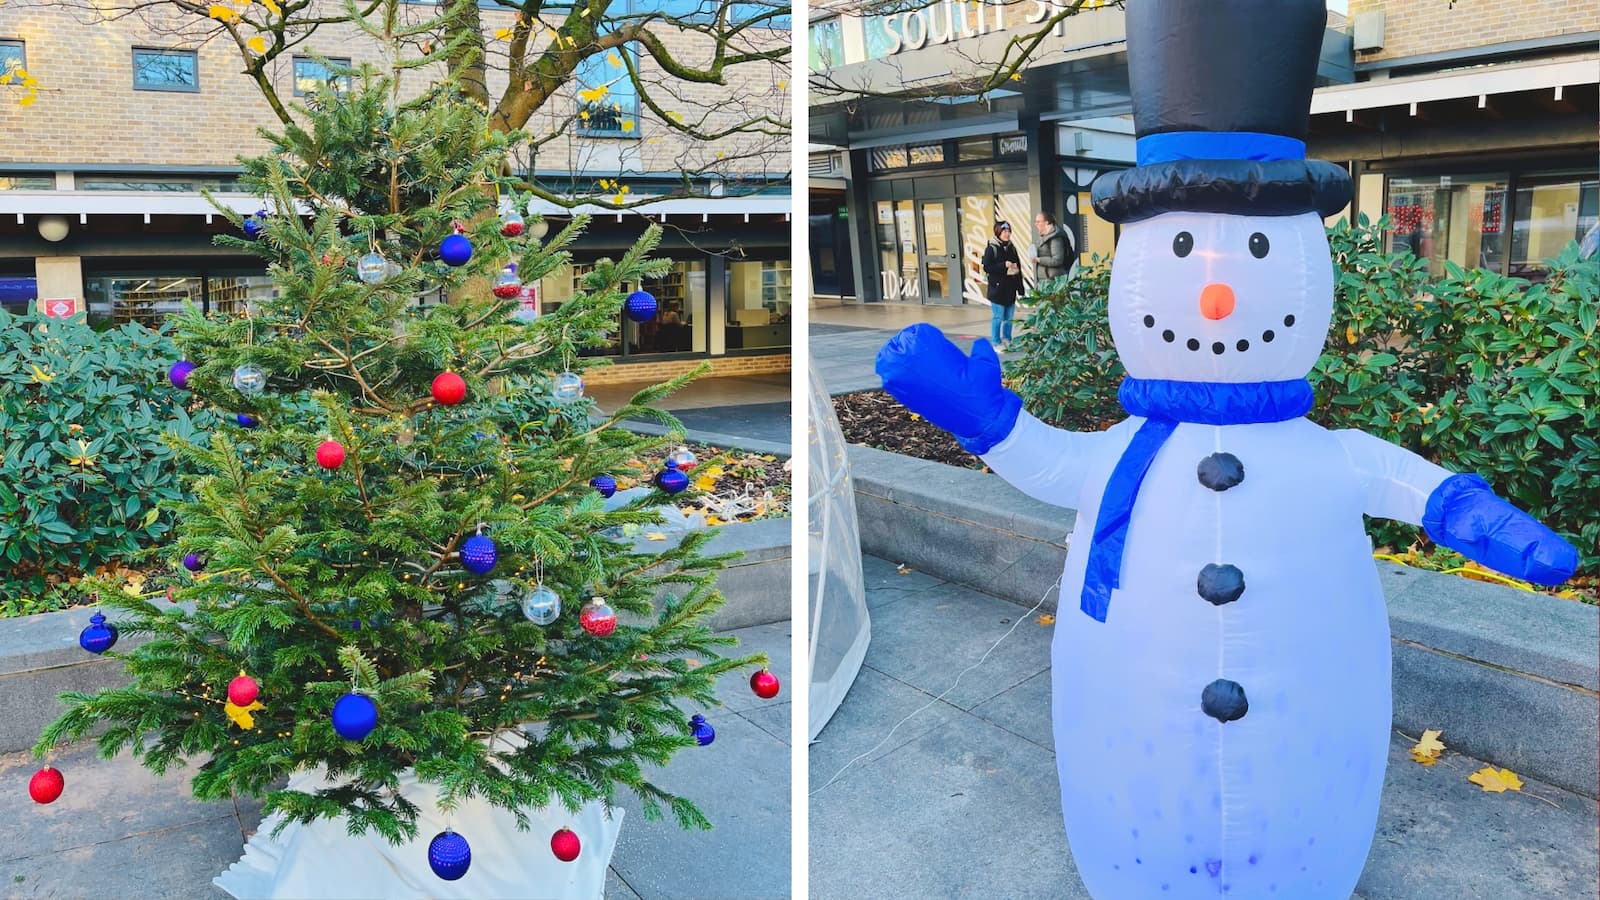 A compilation of two images, one showing a large Christmas tree covered with baubles and lights. The other image shows an inflatable snowman.